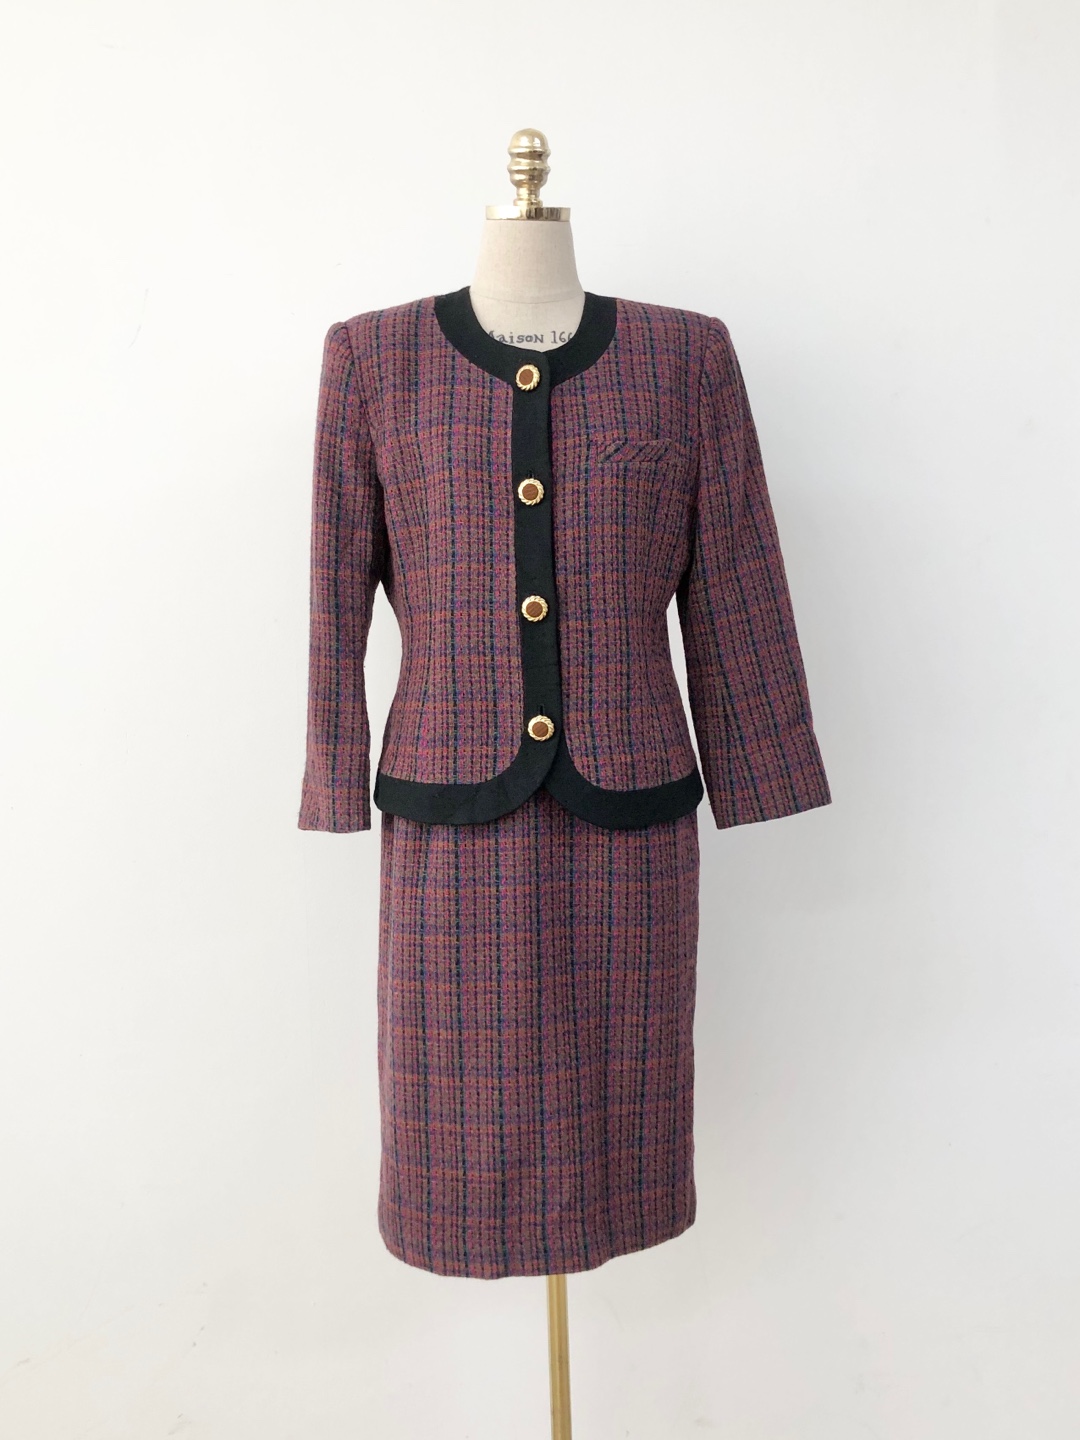 multi-colored tweed jacket skirt two-piece set-up [26-28 inch]